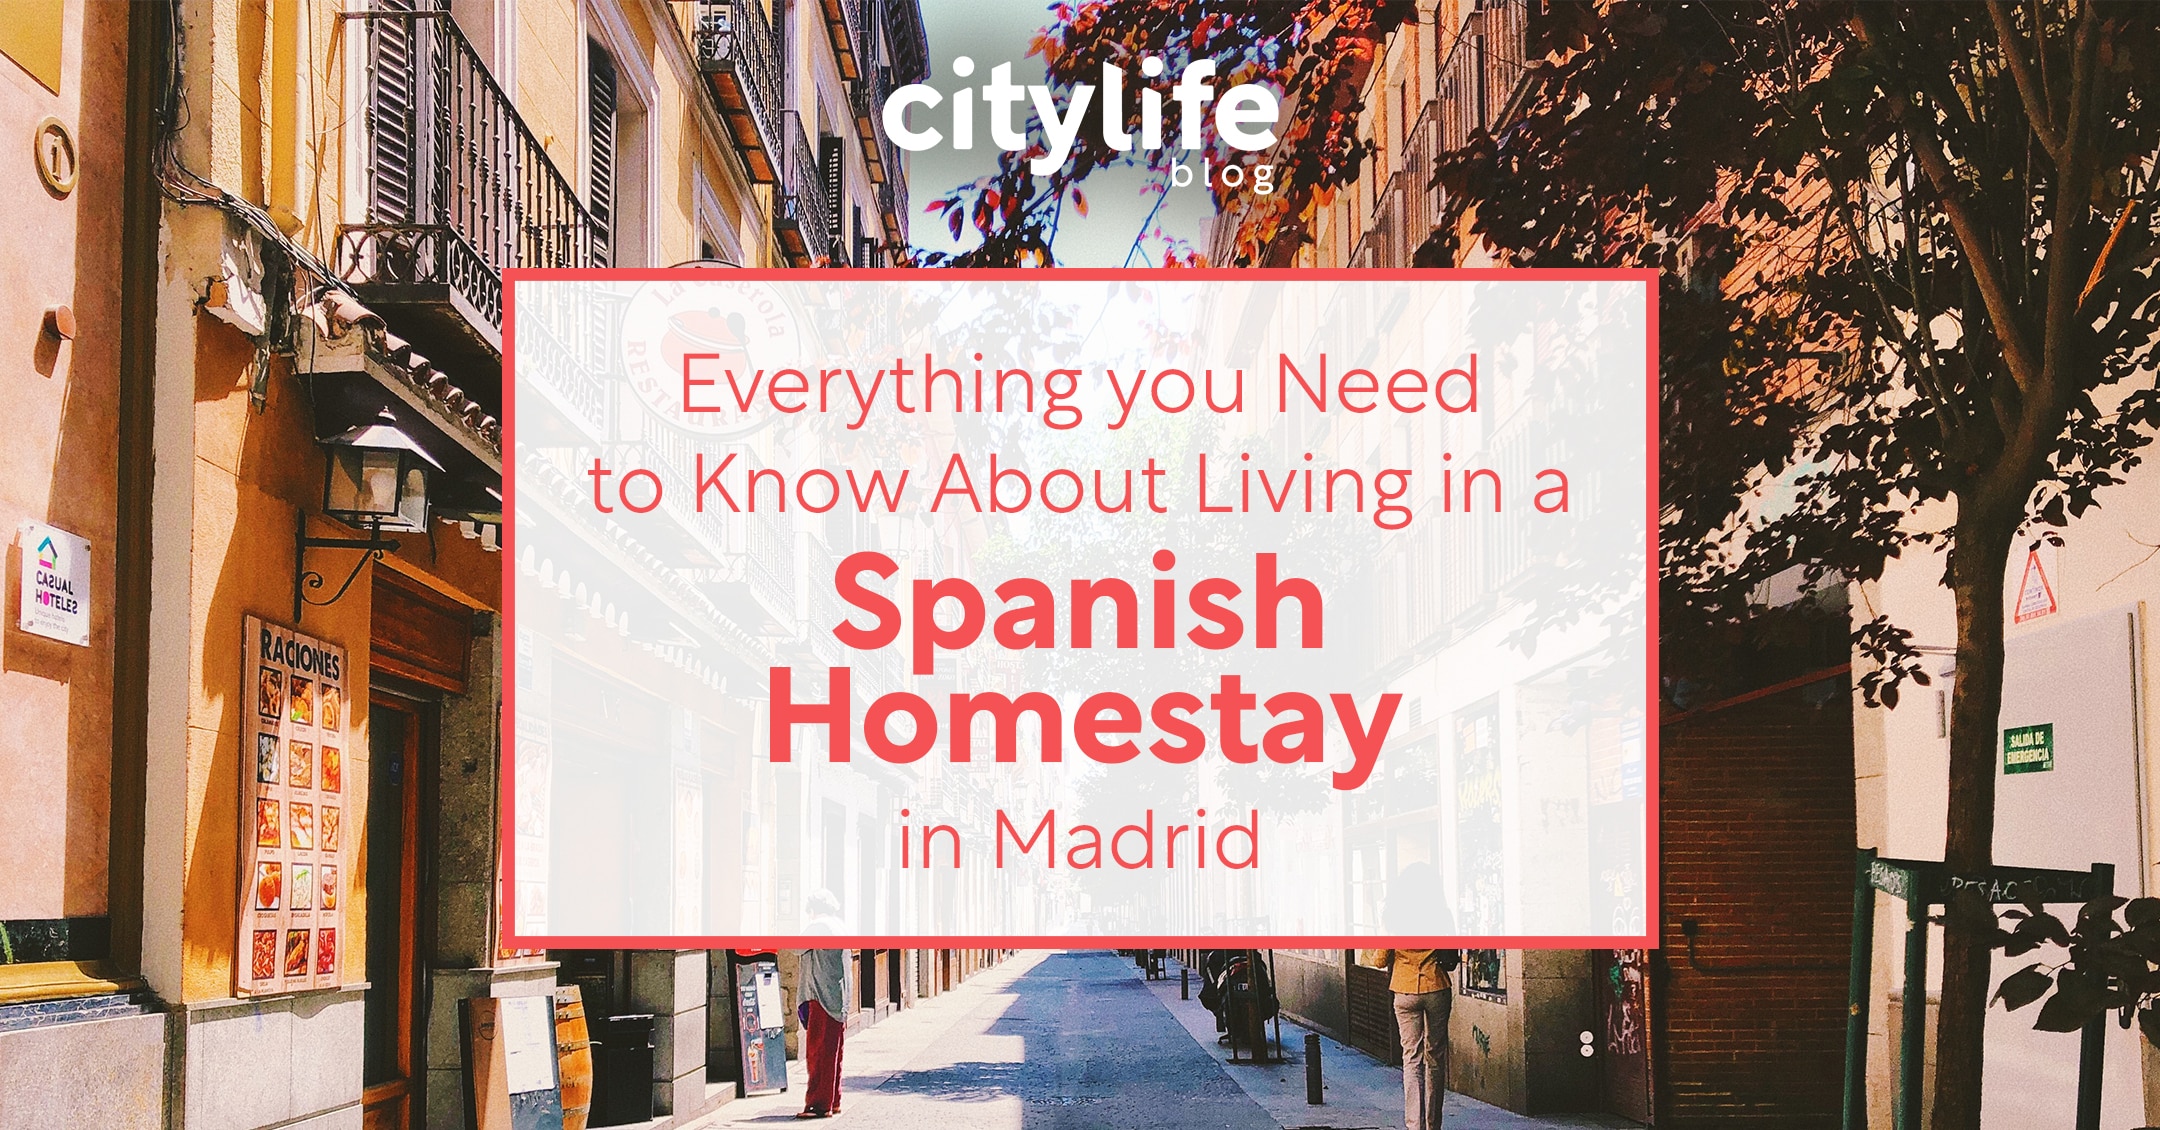 featured-image-living-in-spain-spanish-homestay-citylife-madrid